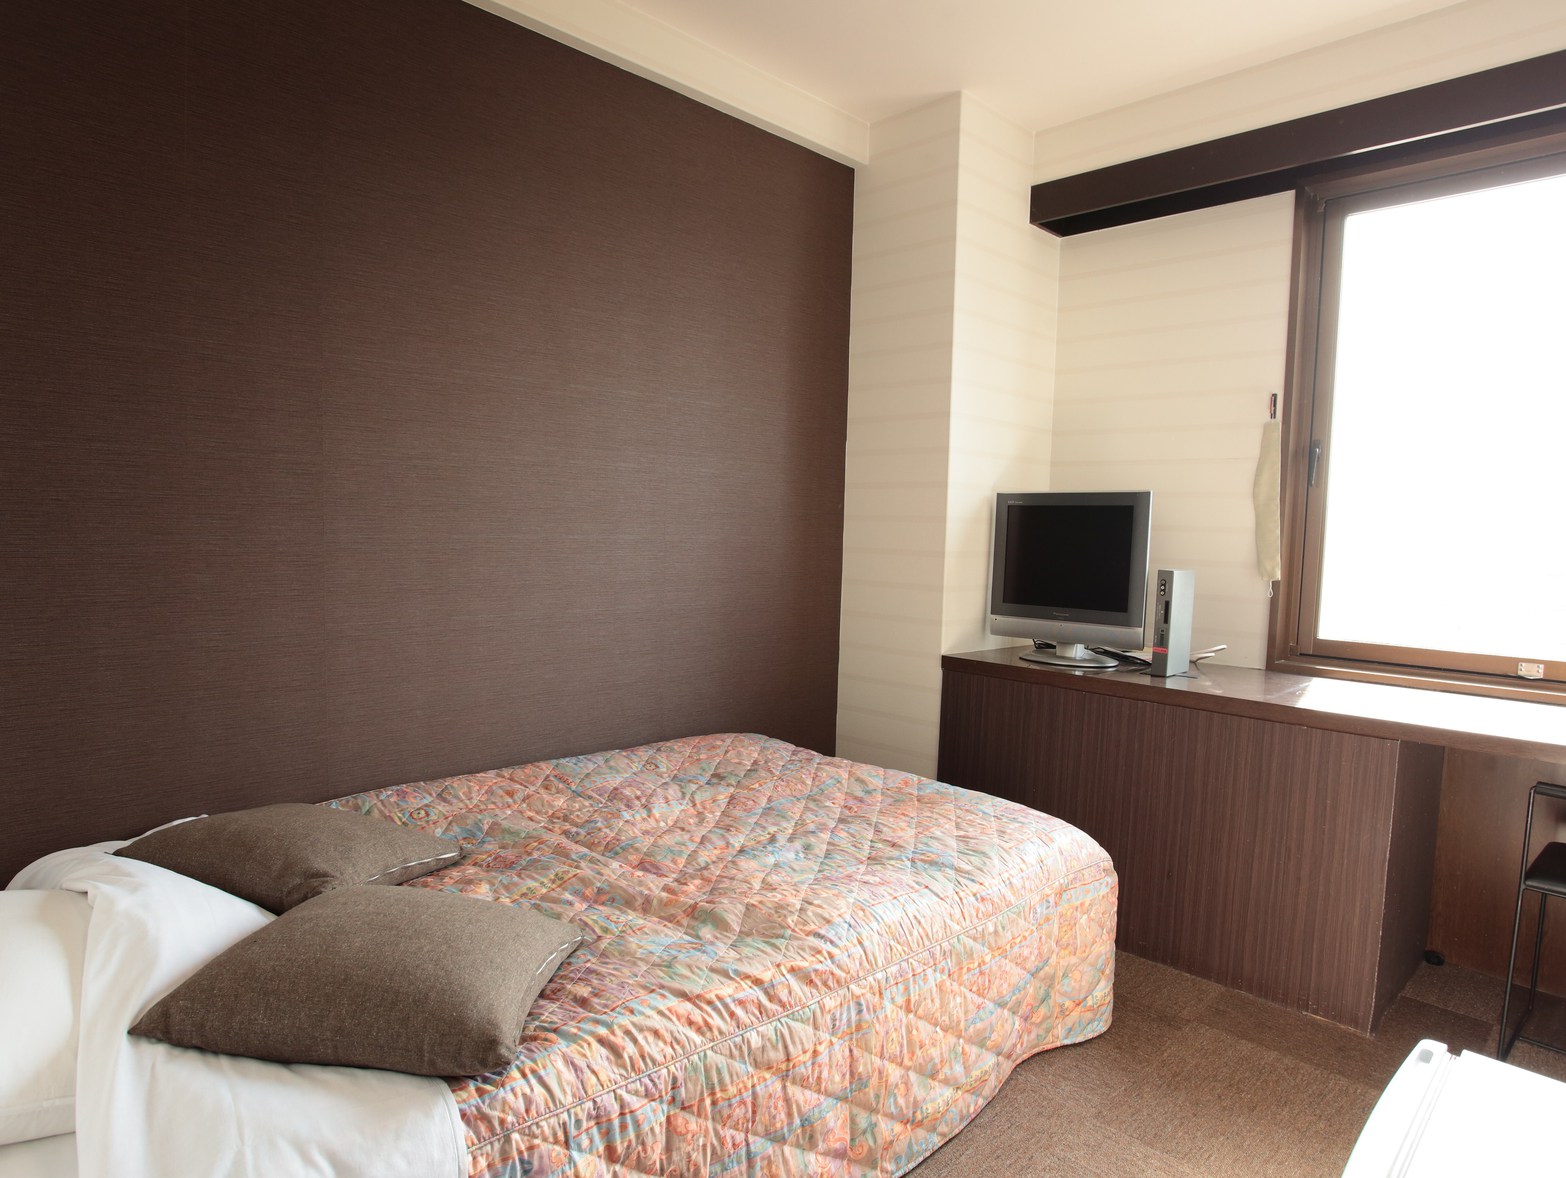 Hotel Tsuru 2 Gokan Ideally located in the Izumi area, Hotel Tsuru 2 Gokan promises a relaxing and wonderful visit. Offering a variety of facilities and services, the property provides all you need for a good nights sle